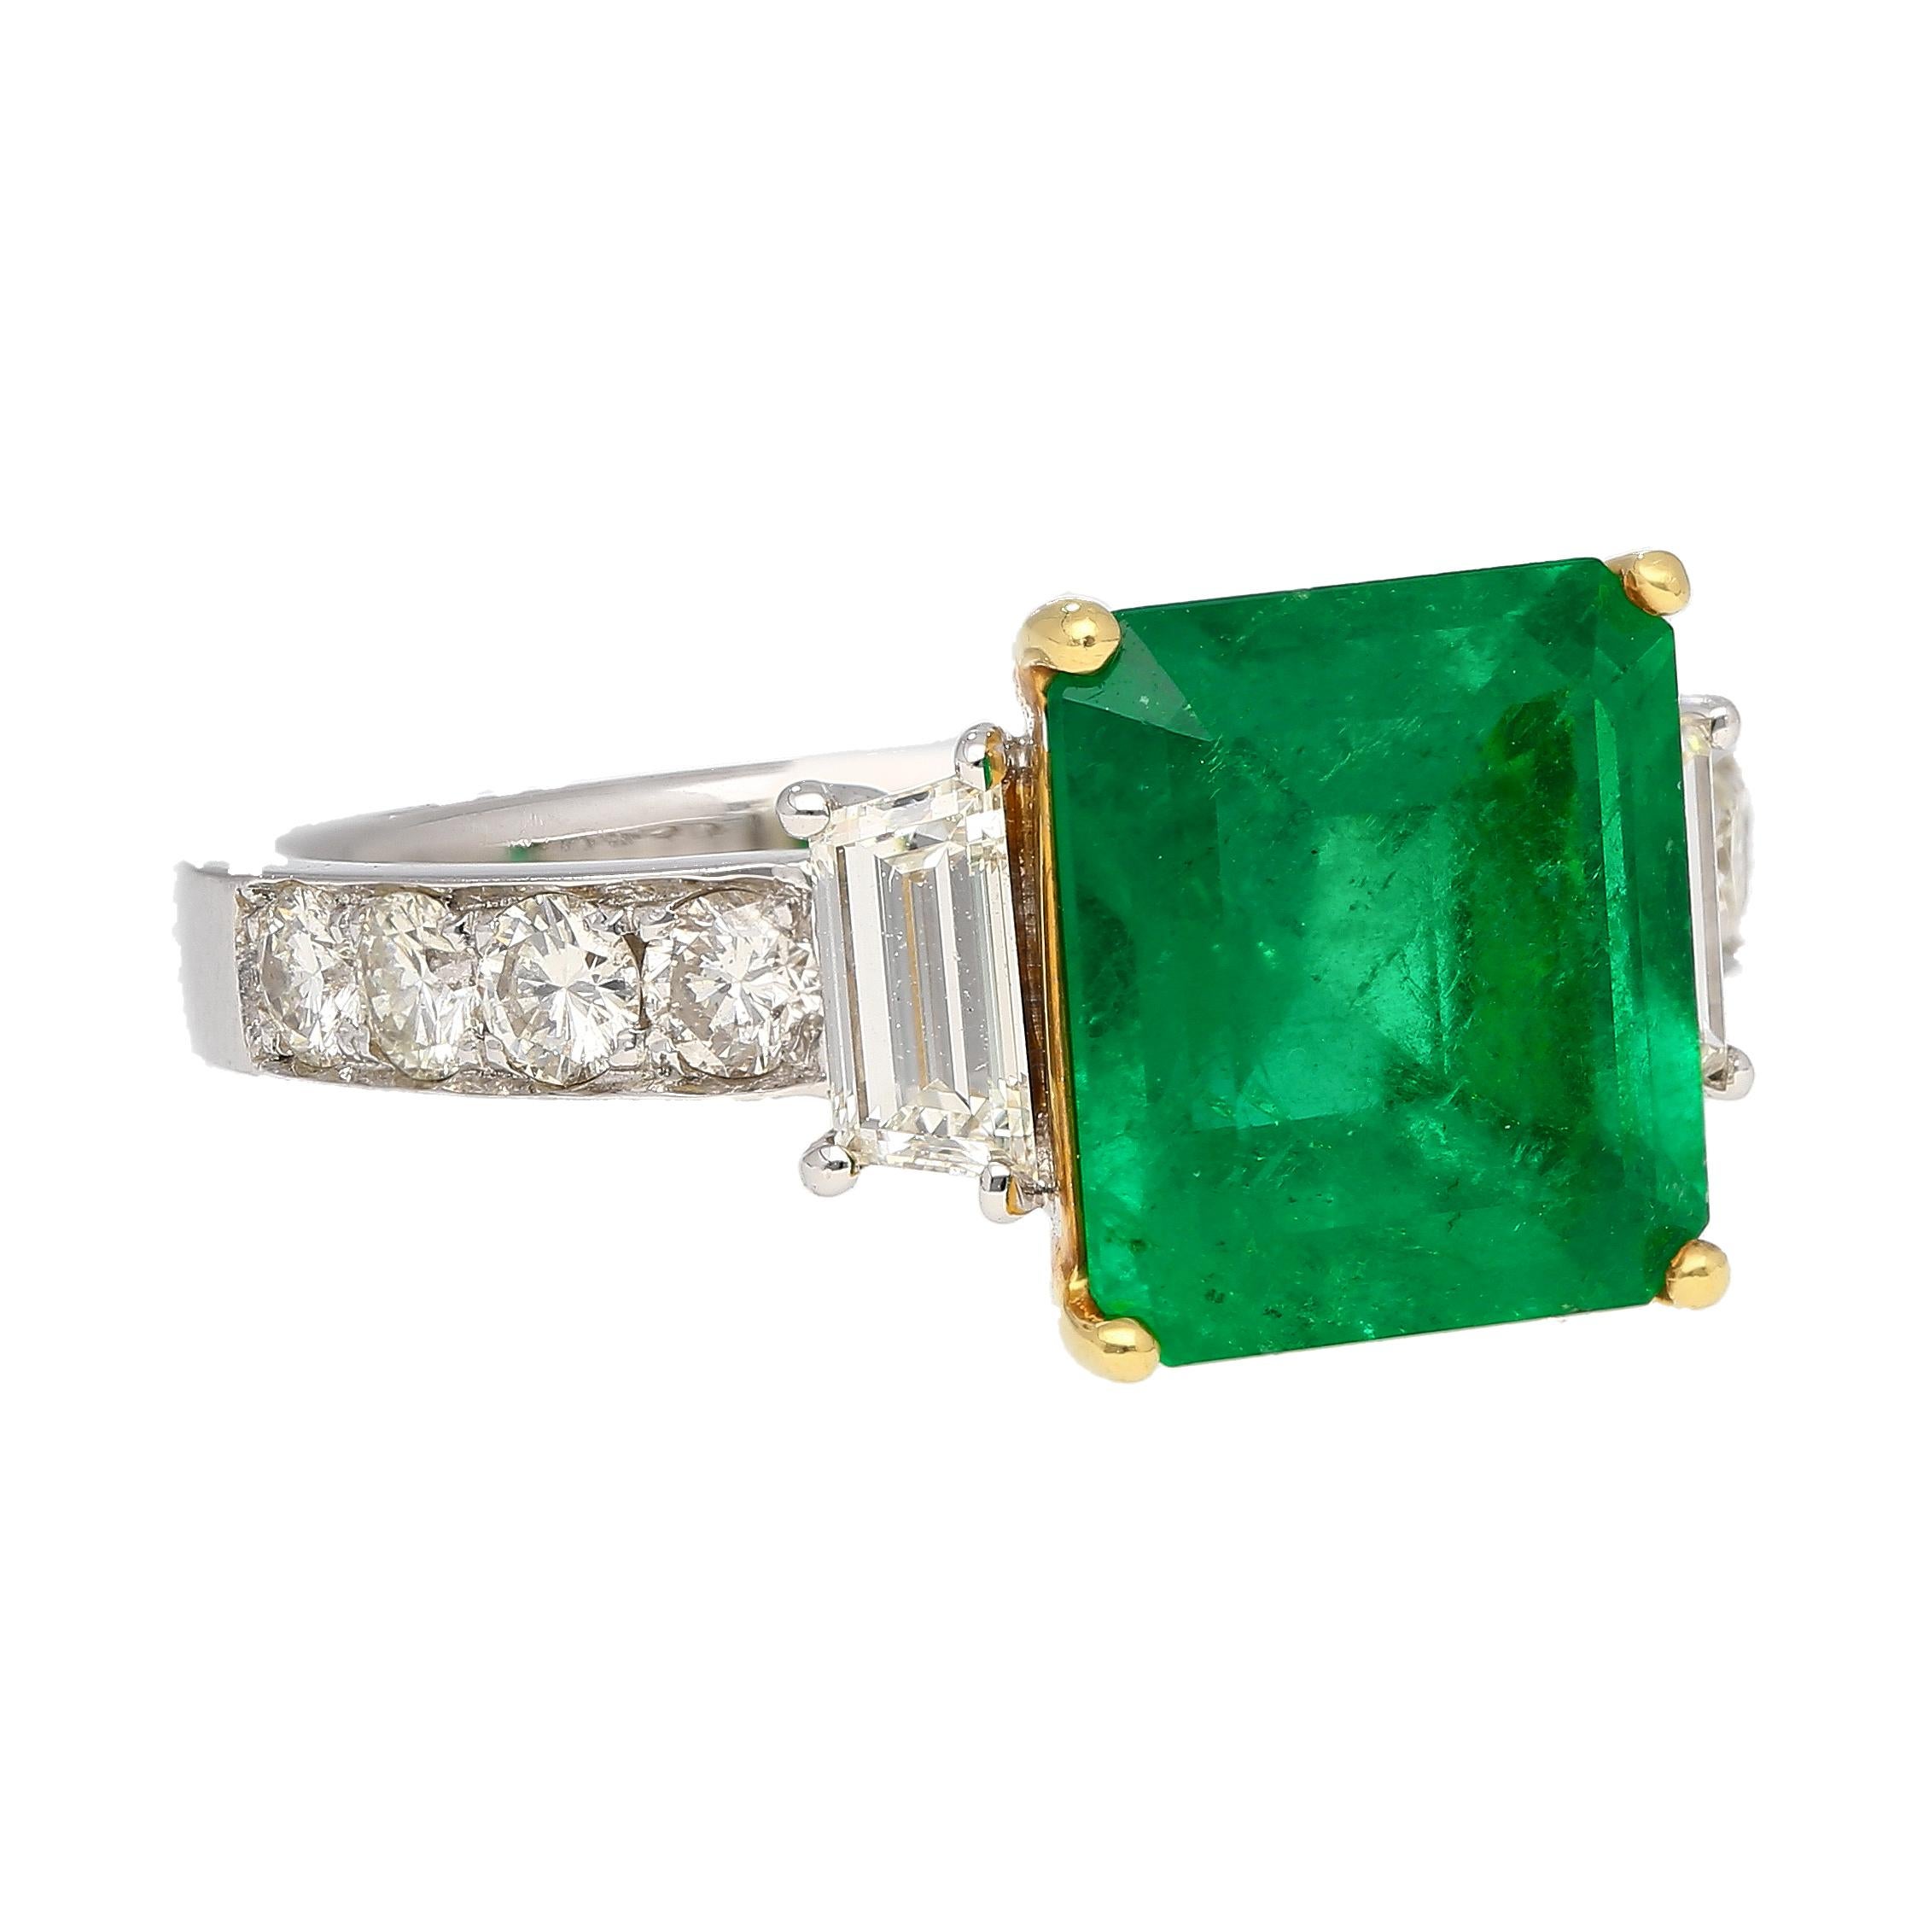 18K white and yellow gold prong-set emerald and diamond ring. Featuring a significant 3.16 emerald cut Colombian emerald with Vivid Green color and minor oil treatment.  GRS certified with additional appendix letter. This emerald gem is a true